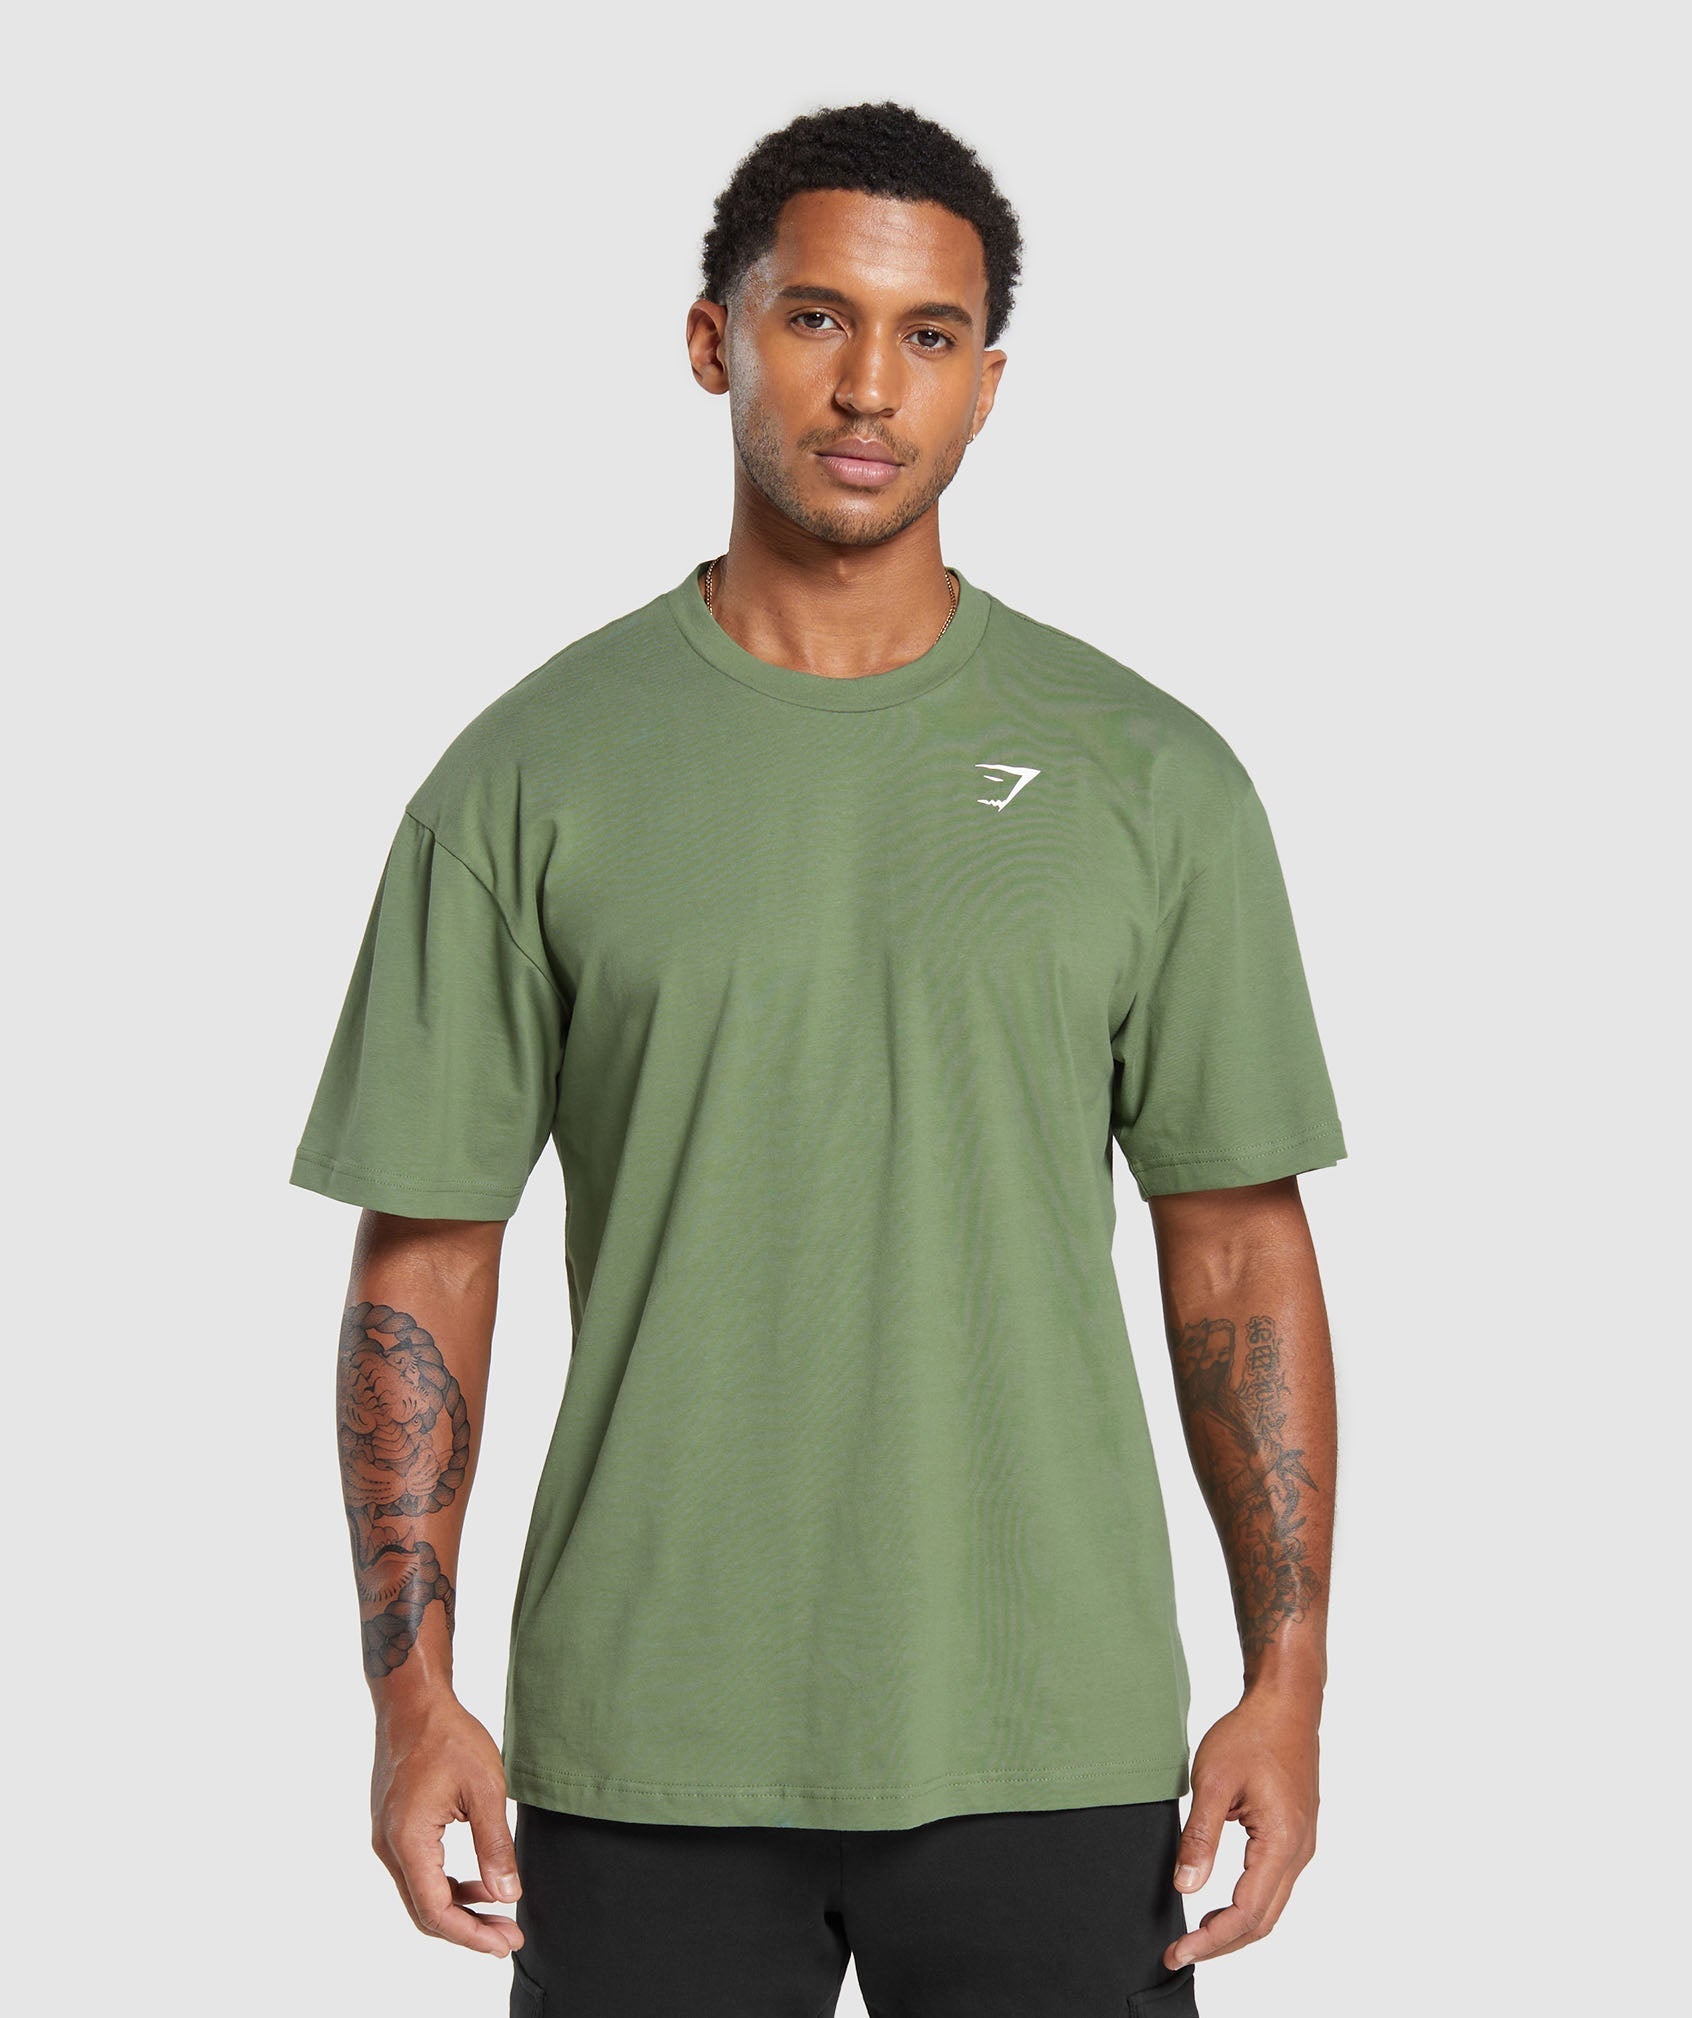 Essential Oversized T-Shirt in Force Green is out of stock